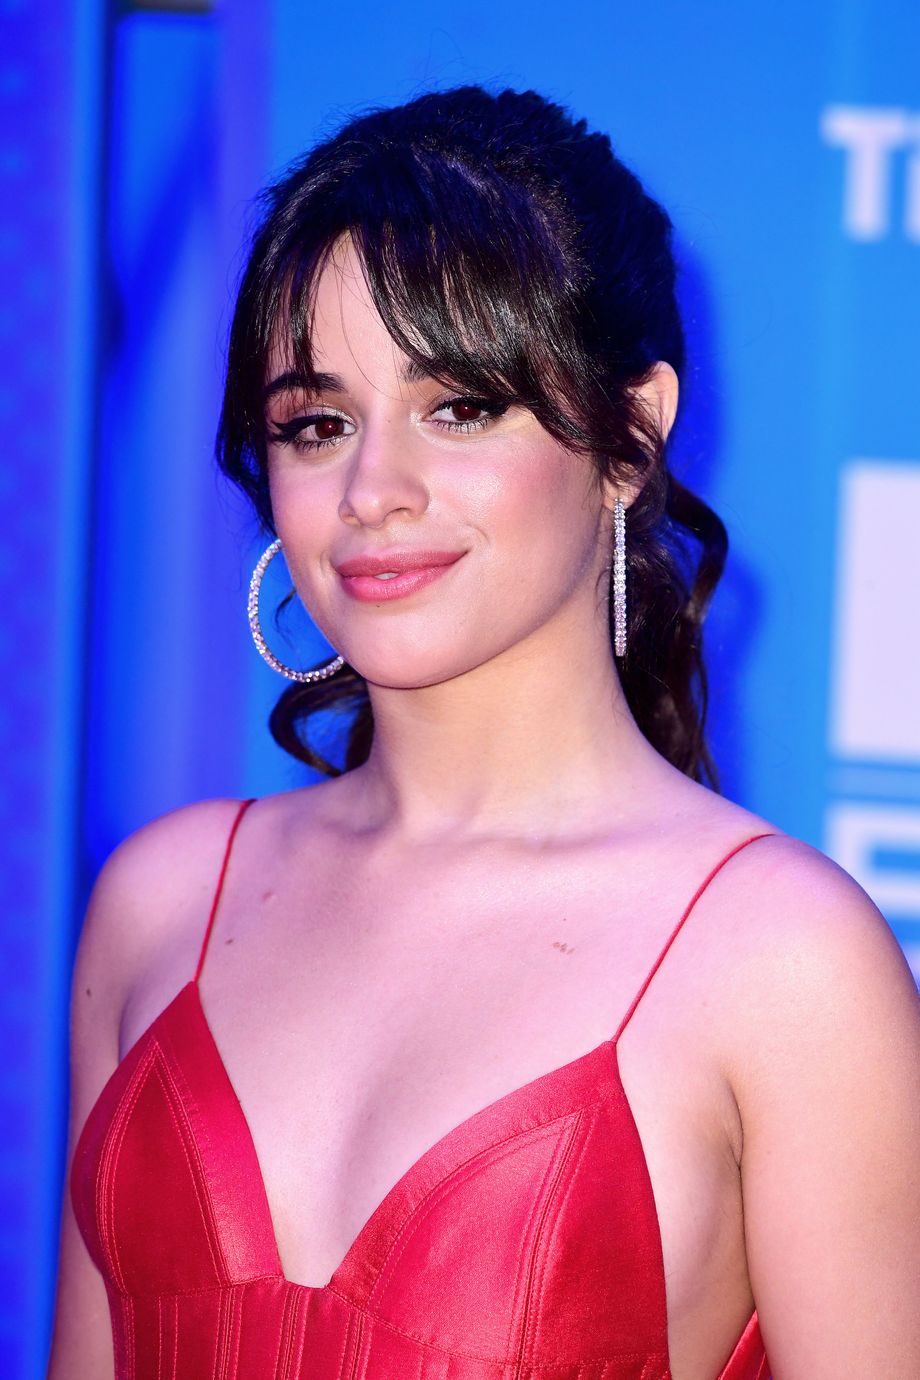 Camilla Cabello wearing a red dress